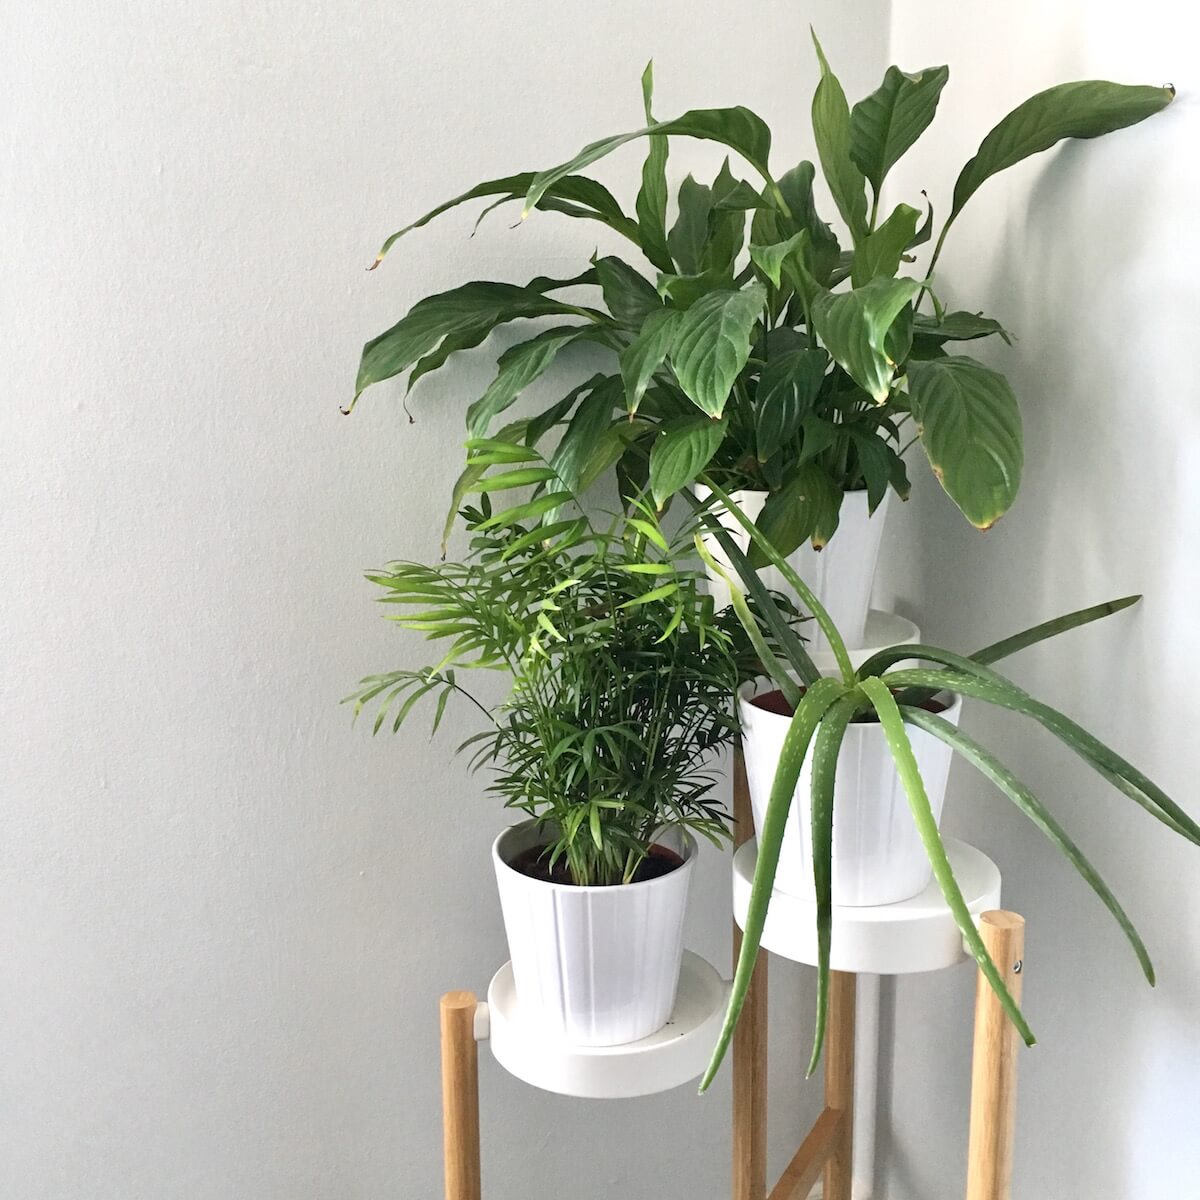 An ikea planter and pots with plants.